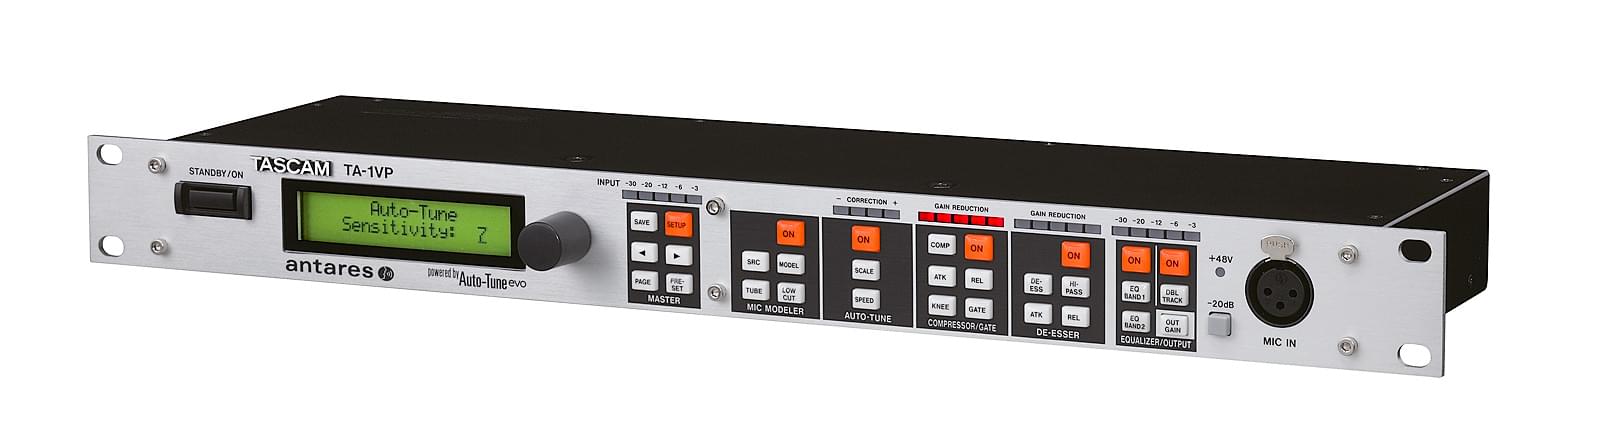 Analog Tube Modeling Effect High-Performance Antares Auto-Tune Audio Technology Vocal Processor with Evo Real-Time Pitch Correction and Flexible 2-Band Parametric EQ Tascam TA-1VP 